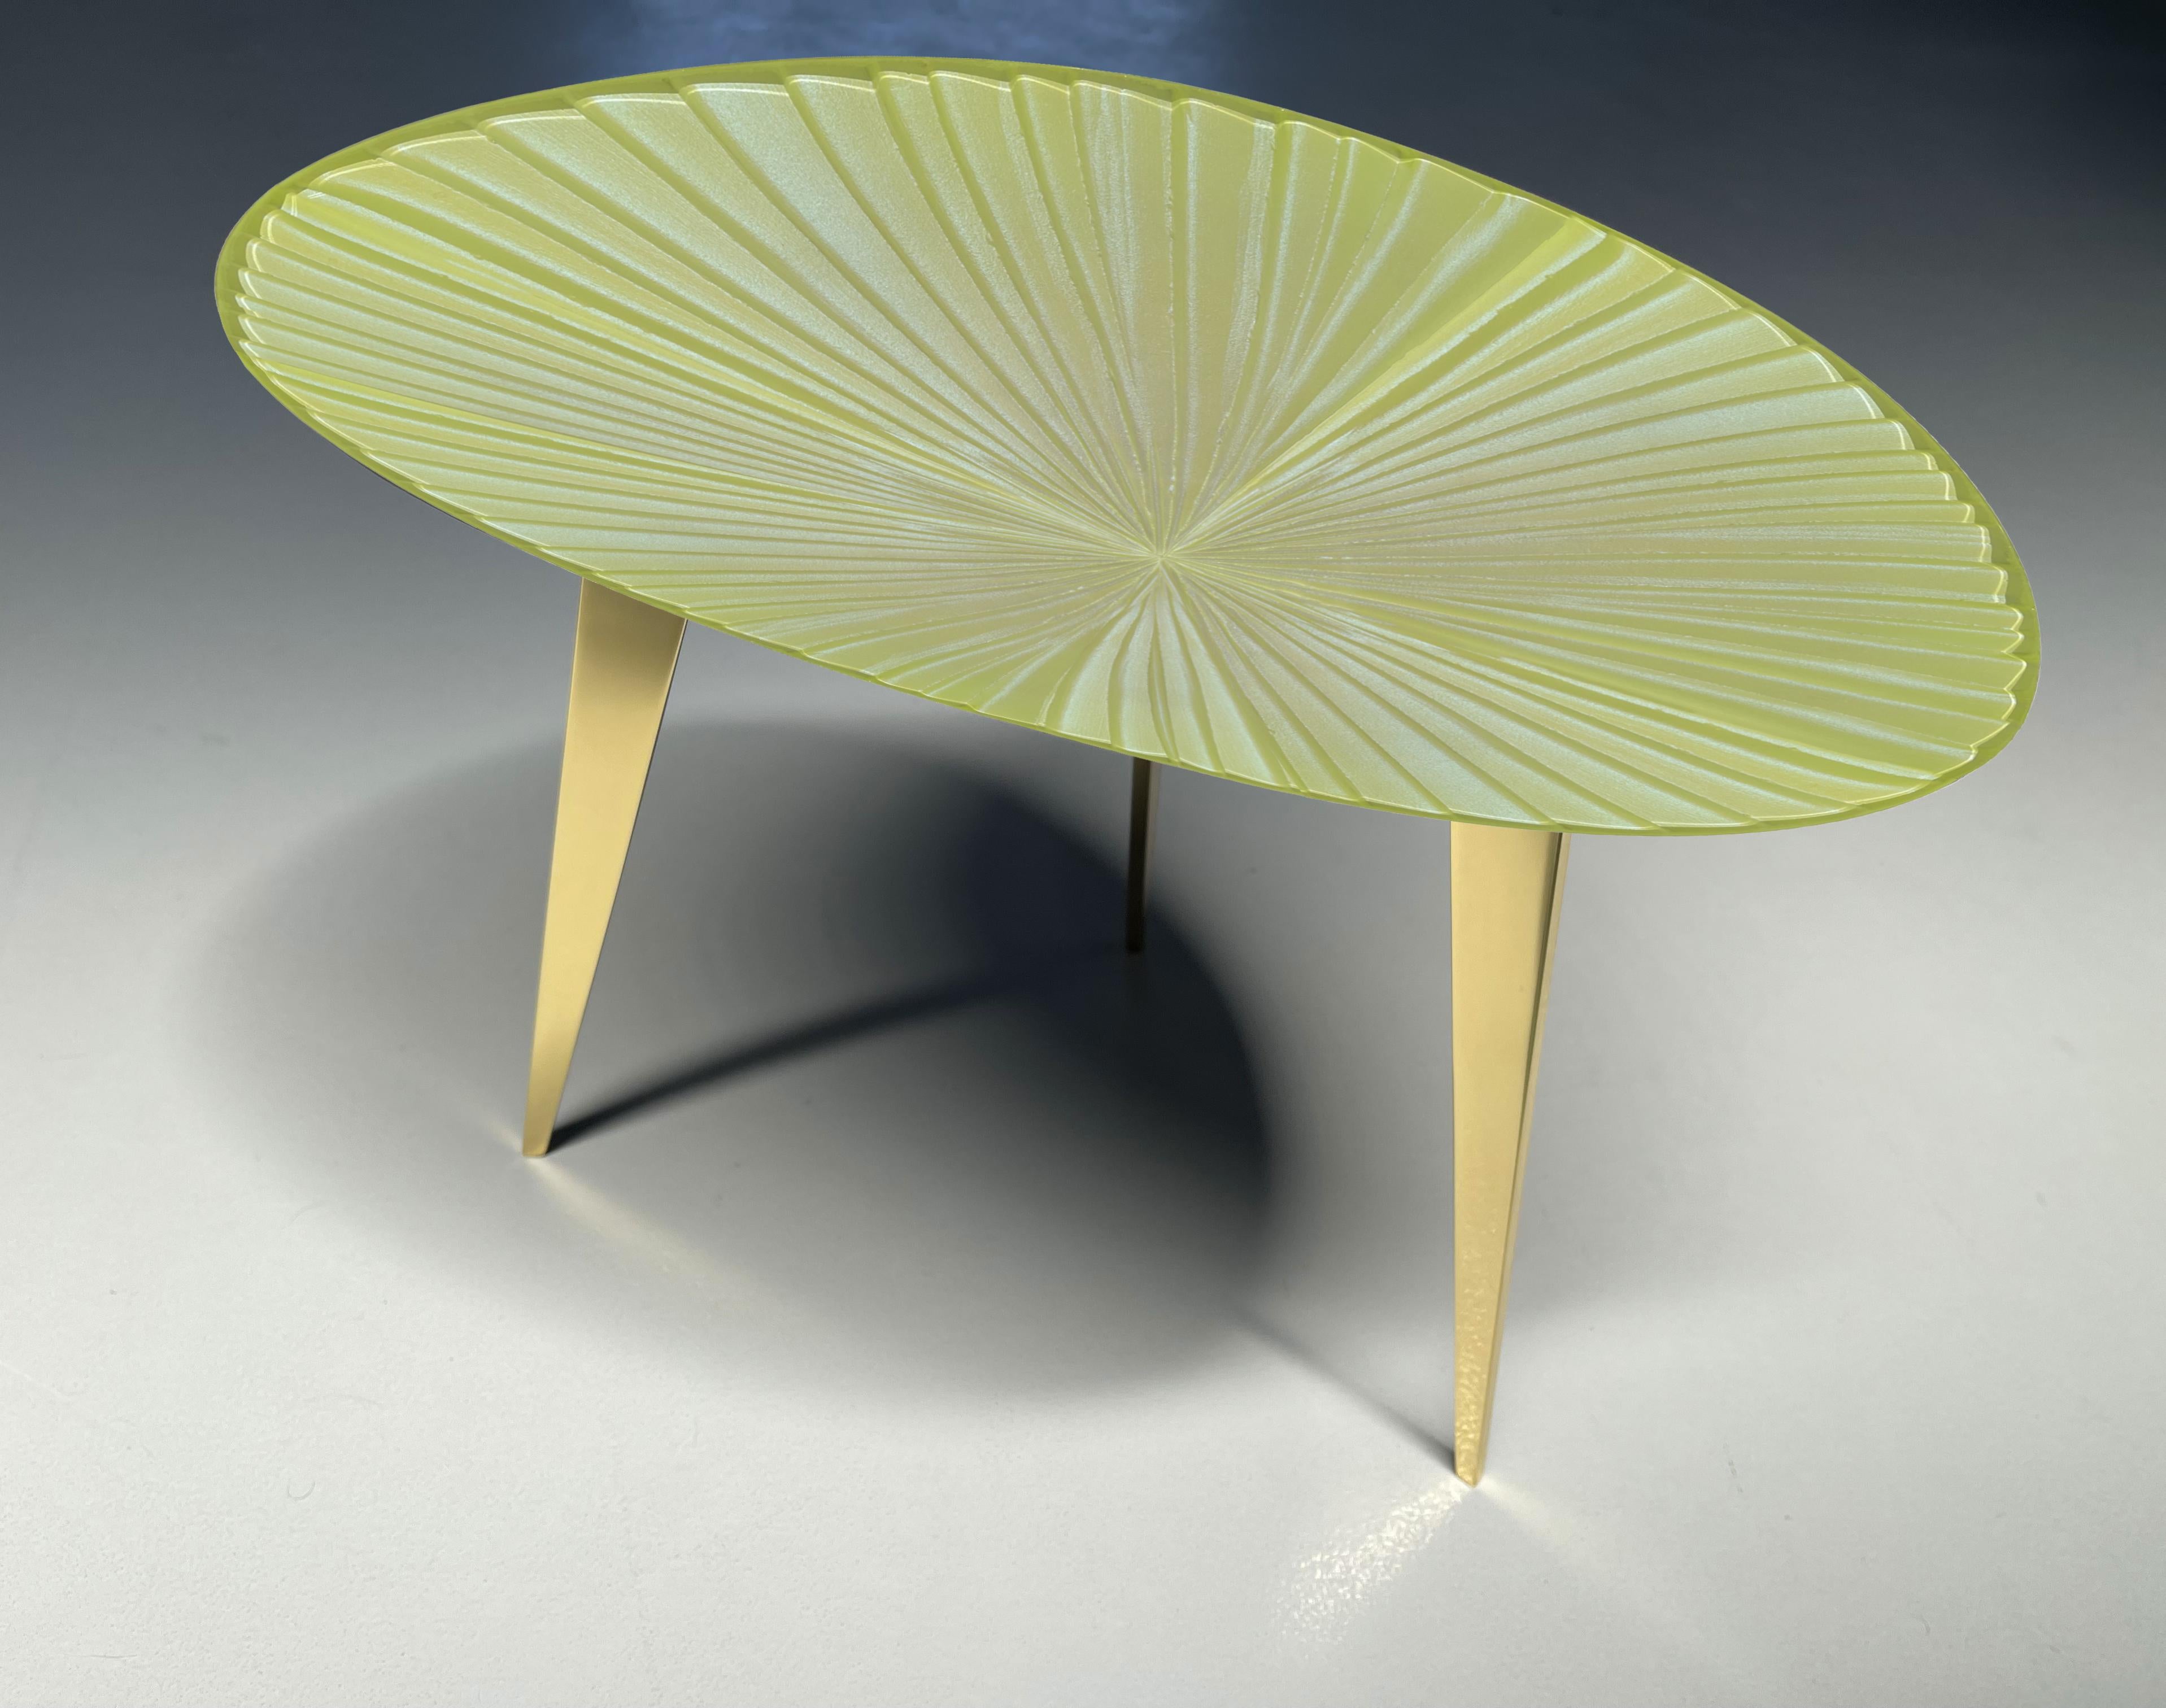 Hand-Crafted Contemporary 'Fluo' Coffee Table Iridescent Yellow Crystal by Ghirò Studio For Sale